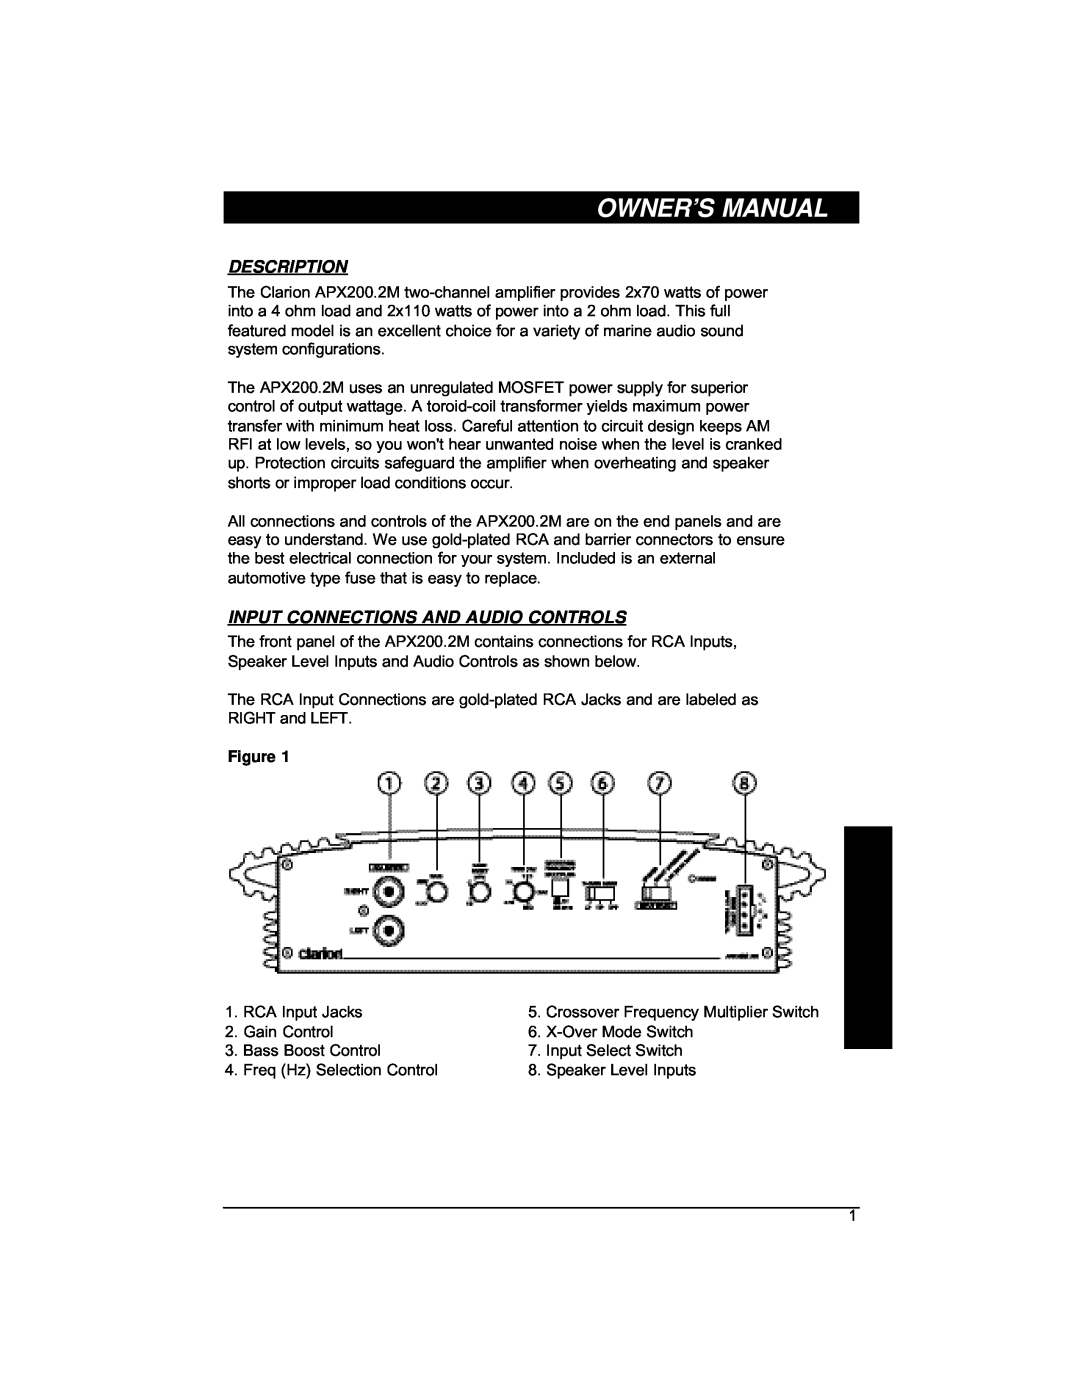 Clarion APX200 installation manual Description, Input Connections And Audio Controls 